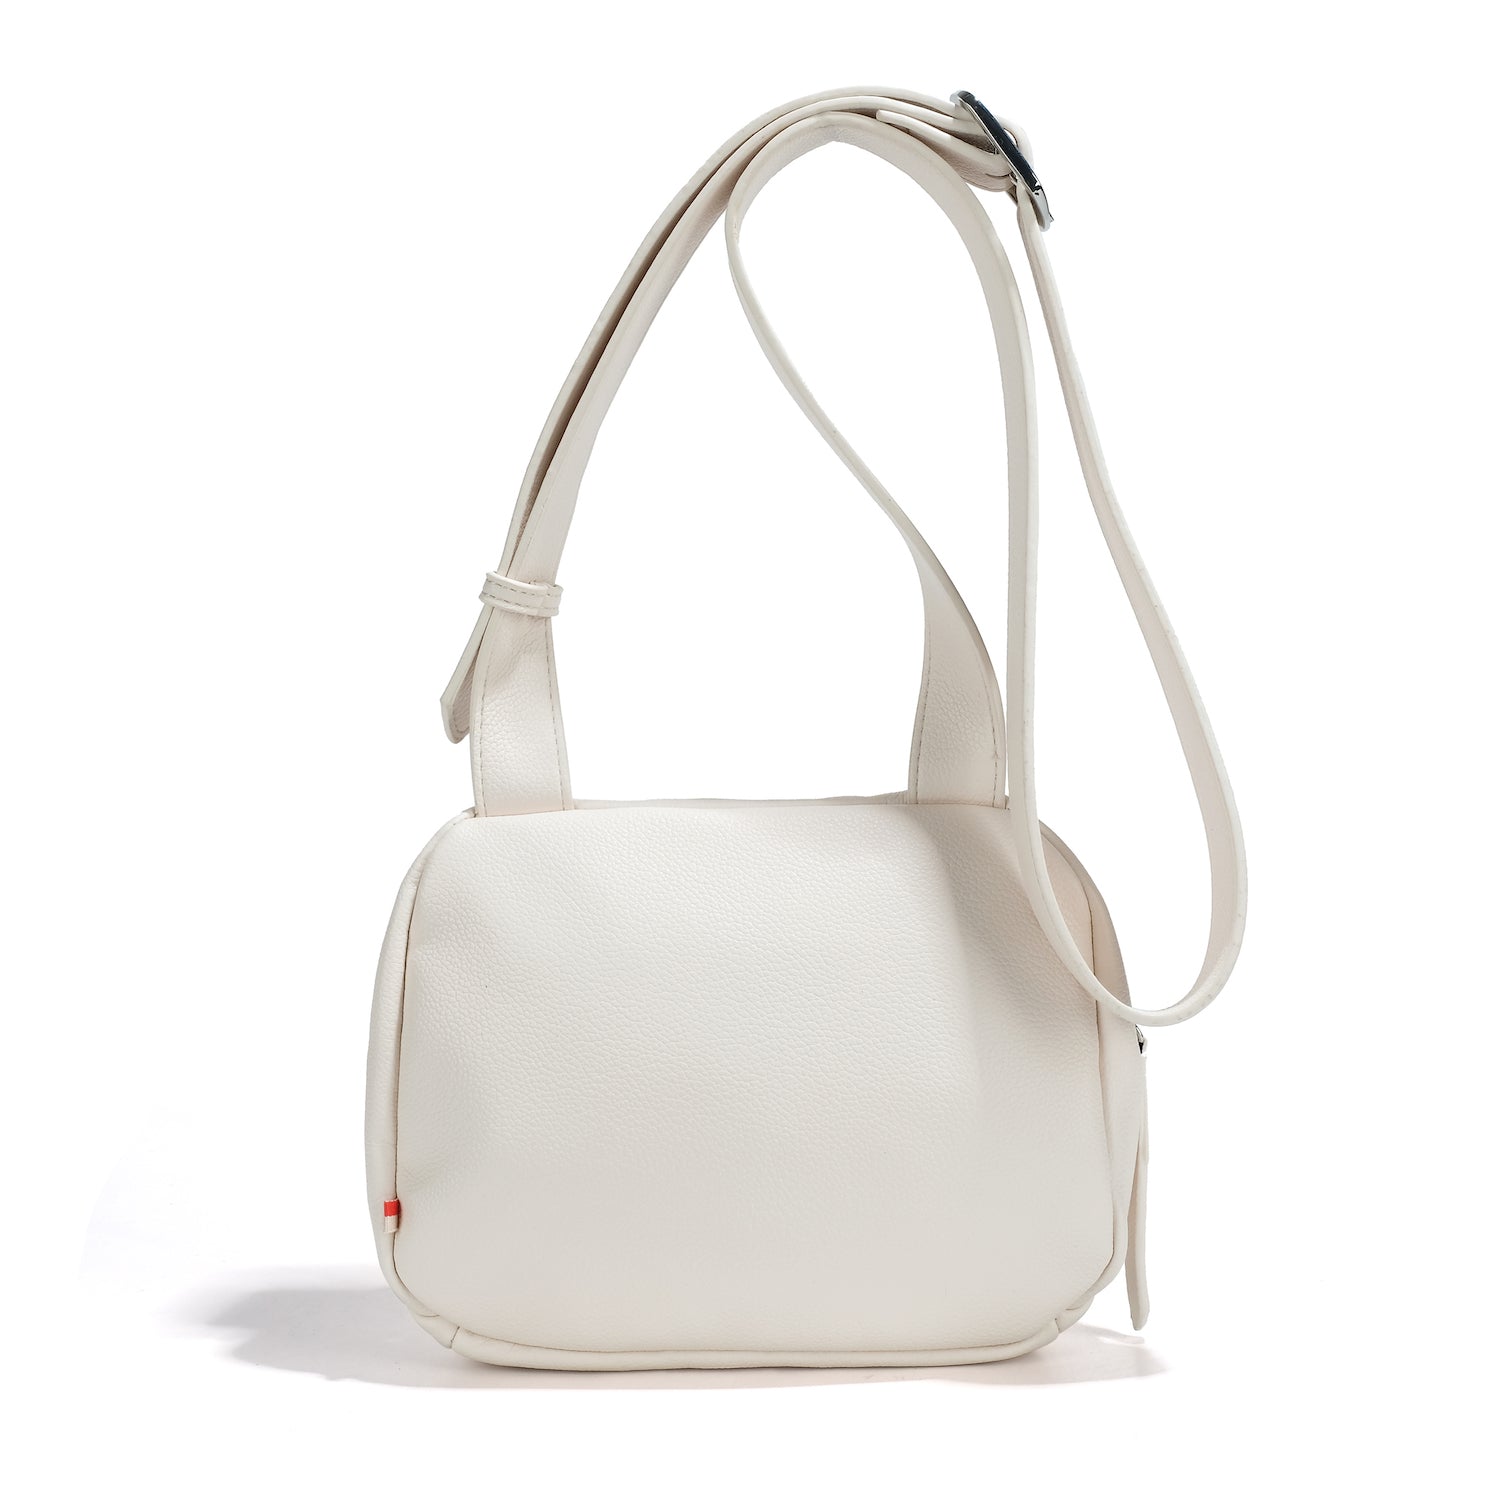 co-lab Eleni Crossbody - Cream Accessories - Other Accessories - Handbags & Wallets by co-lab | Grace the Boutique